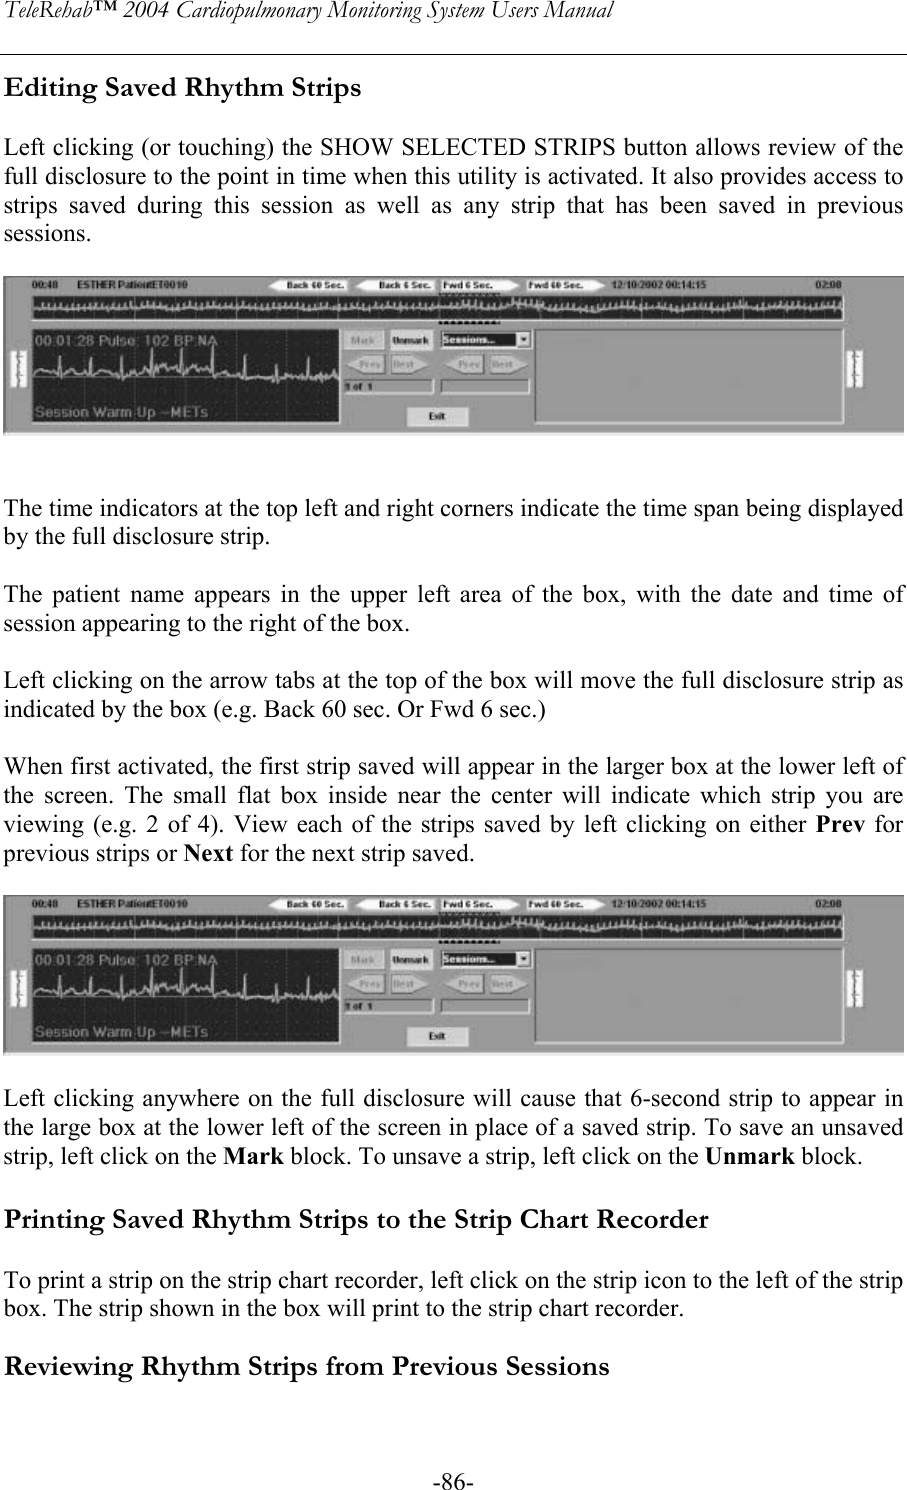 TeleRehab™ 2004 Cardiopulmonary Monitoring System Users Manual    -86-Editing Saved Rhythm Strips  Left clicking (or touching) the SHOW SELECTED STRIPS button allows review of the full disclosure to the point in time when this utility is activated. It also provides access to strips saved during this session as well as any strip that has been saved in previous sessions.     The time indicators at the top left and right corners indicate the time span being displayed by the full disclosure strip.  The patient name appears in the upper left area of the box, with the date and time of session appearing to the right of the box.  Left clicking on the arrow tabs at the top of the box will move the full disclosure strip as indicated by the box (e.g. Back 60 sec. Or Fwd 6 sec.)  When first activated, the first strip saved will appear in the larger box at the lower left of the screen. The small flat box inside near the center will indicate which strip you are viewing (e.g. 2 of 4). View each of the strips saved by left clicking on either Prev for previous strips or Next for the next strip saved.     Left clicking anywhere on the full disclosure will cause that 6-second strip to appear in the large box at the lower left of the screen in place of a saved strip. To save an unsaved strip, left click on the Mark block. To unsave a strip, left click on the Unmark block.  Printing Saved Rhythm Strips to the Strip Chart Recorder  To print a strip on the strip chart recorder, left click on the strip icon to the left of the strip box. The strip shown in the box will print to the strip chart recorder.  Reviewing Rhythm Strips from Previous Sessions  